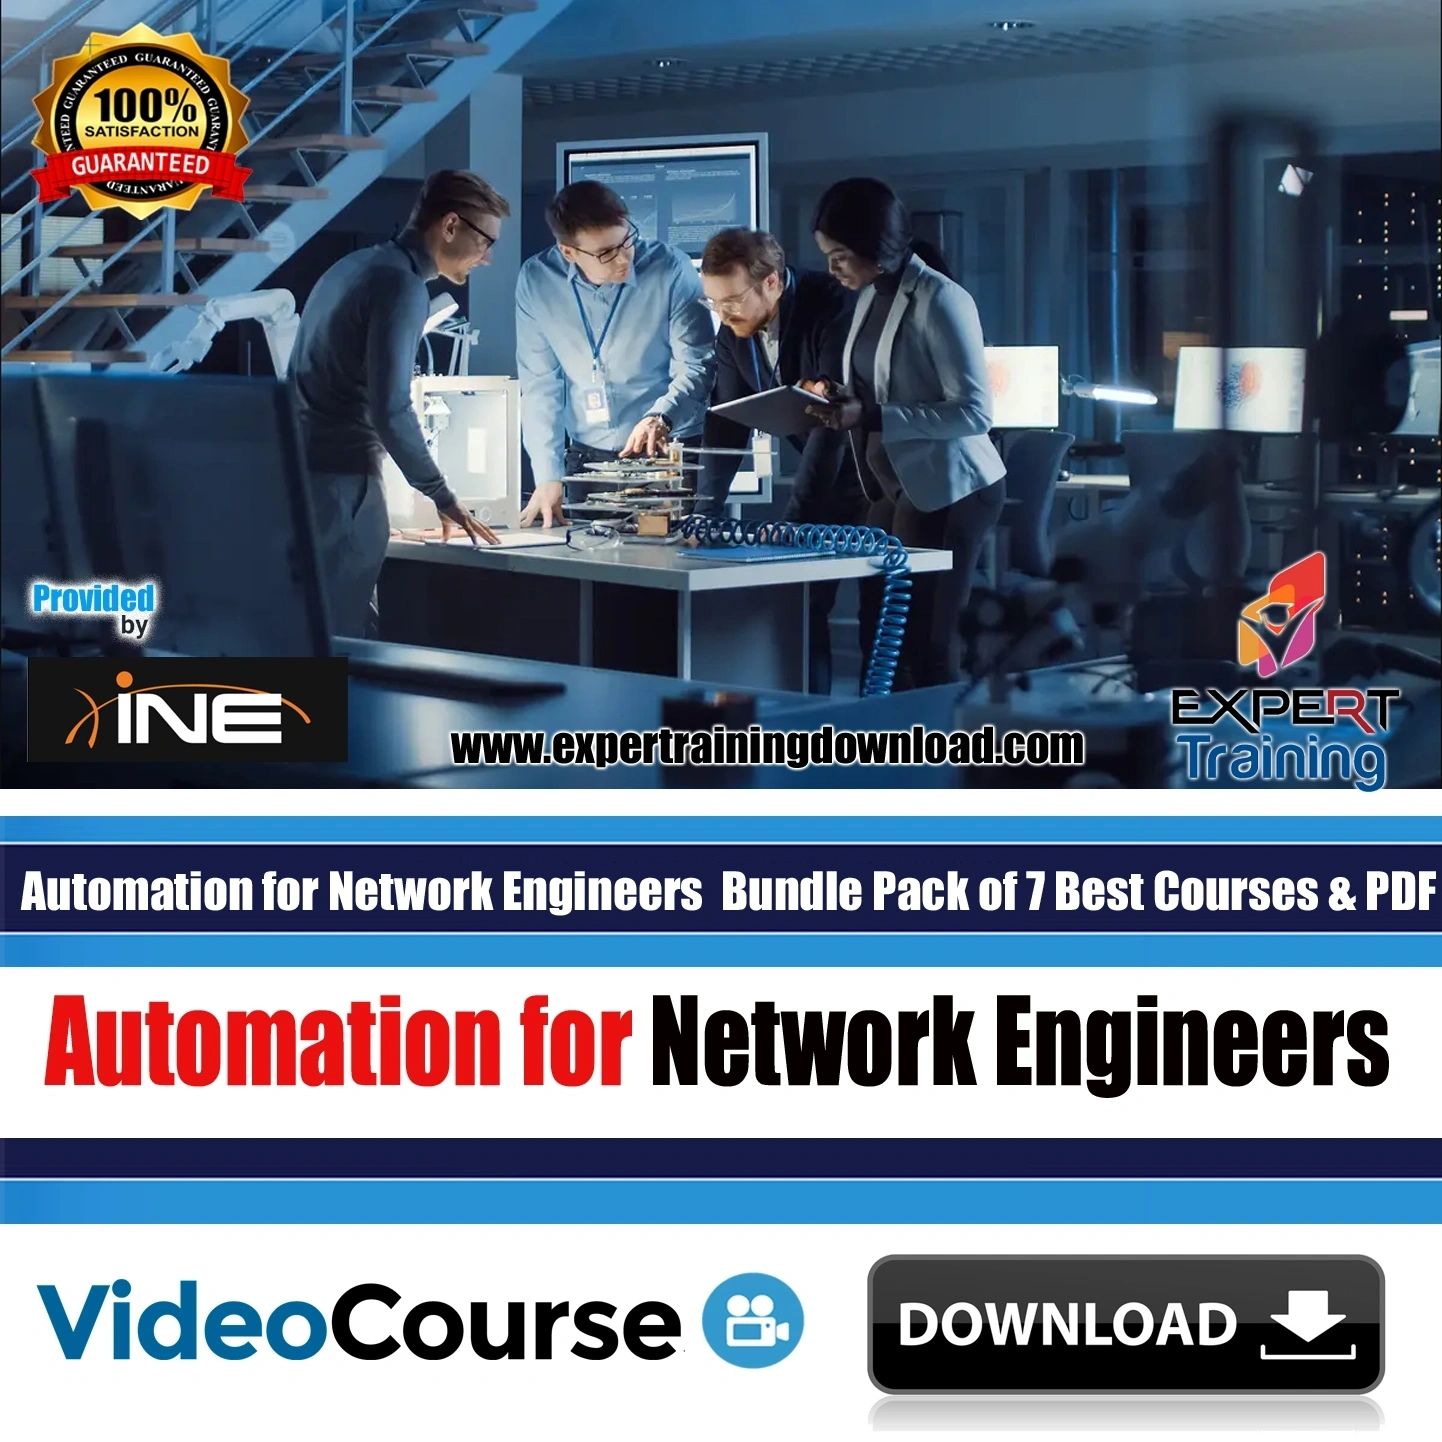 Automation for Network Engineers Bundle Pack of 10 Best Courses & PDF Guides